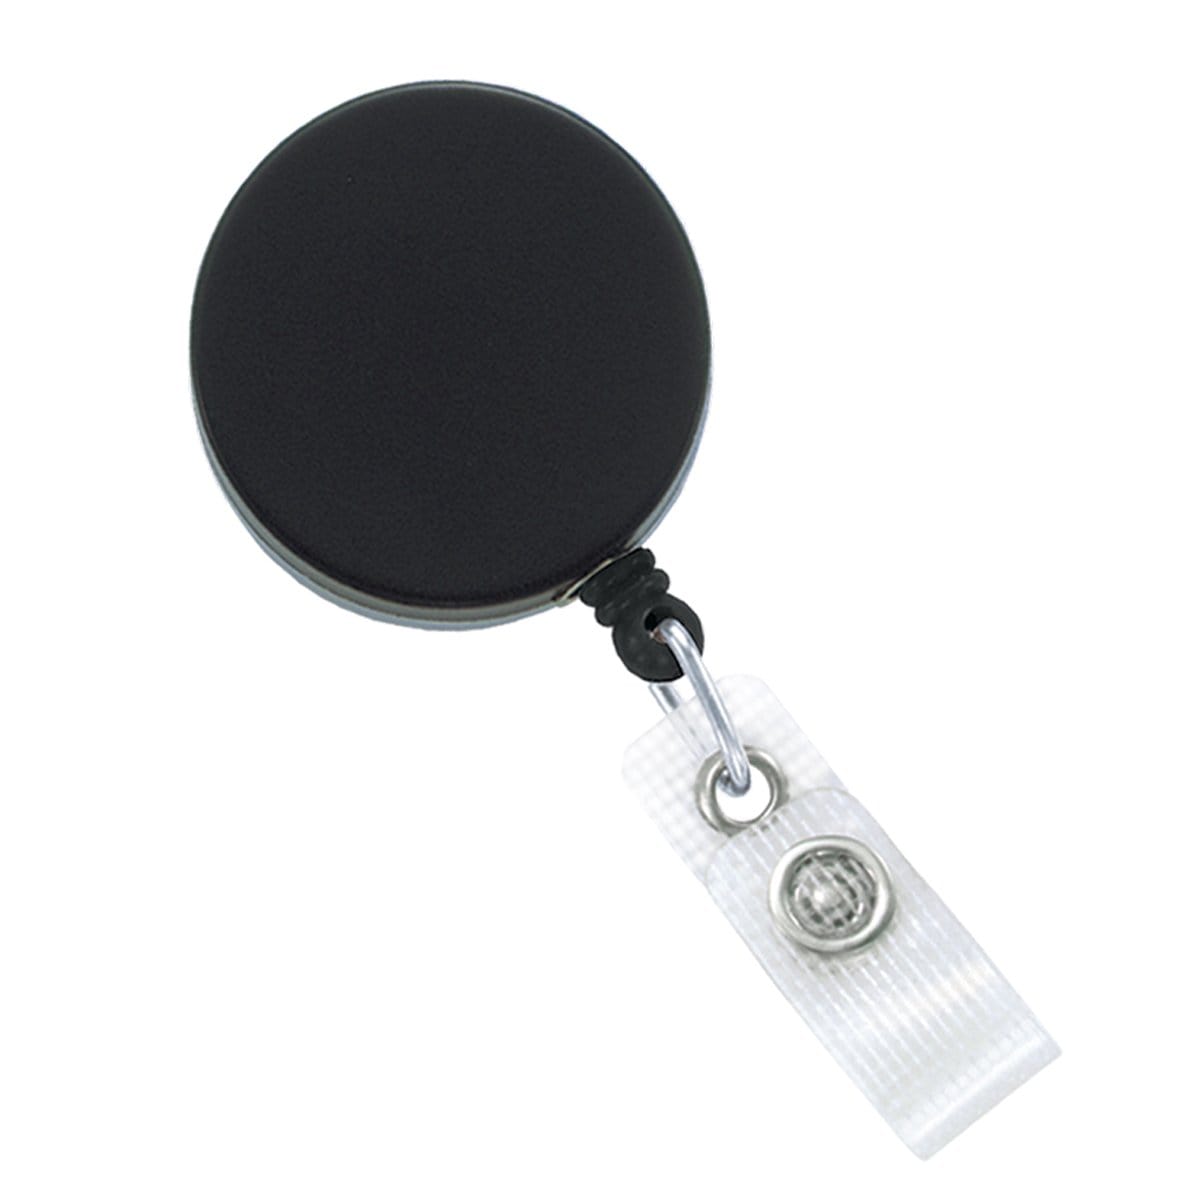 A Black Chrome Heavy Duty Badge Reel with Belt Clip (2120-3300).